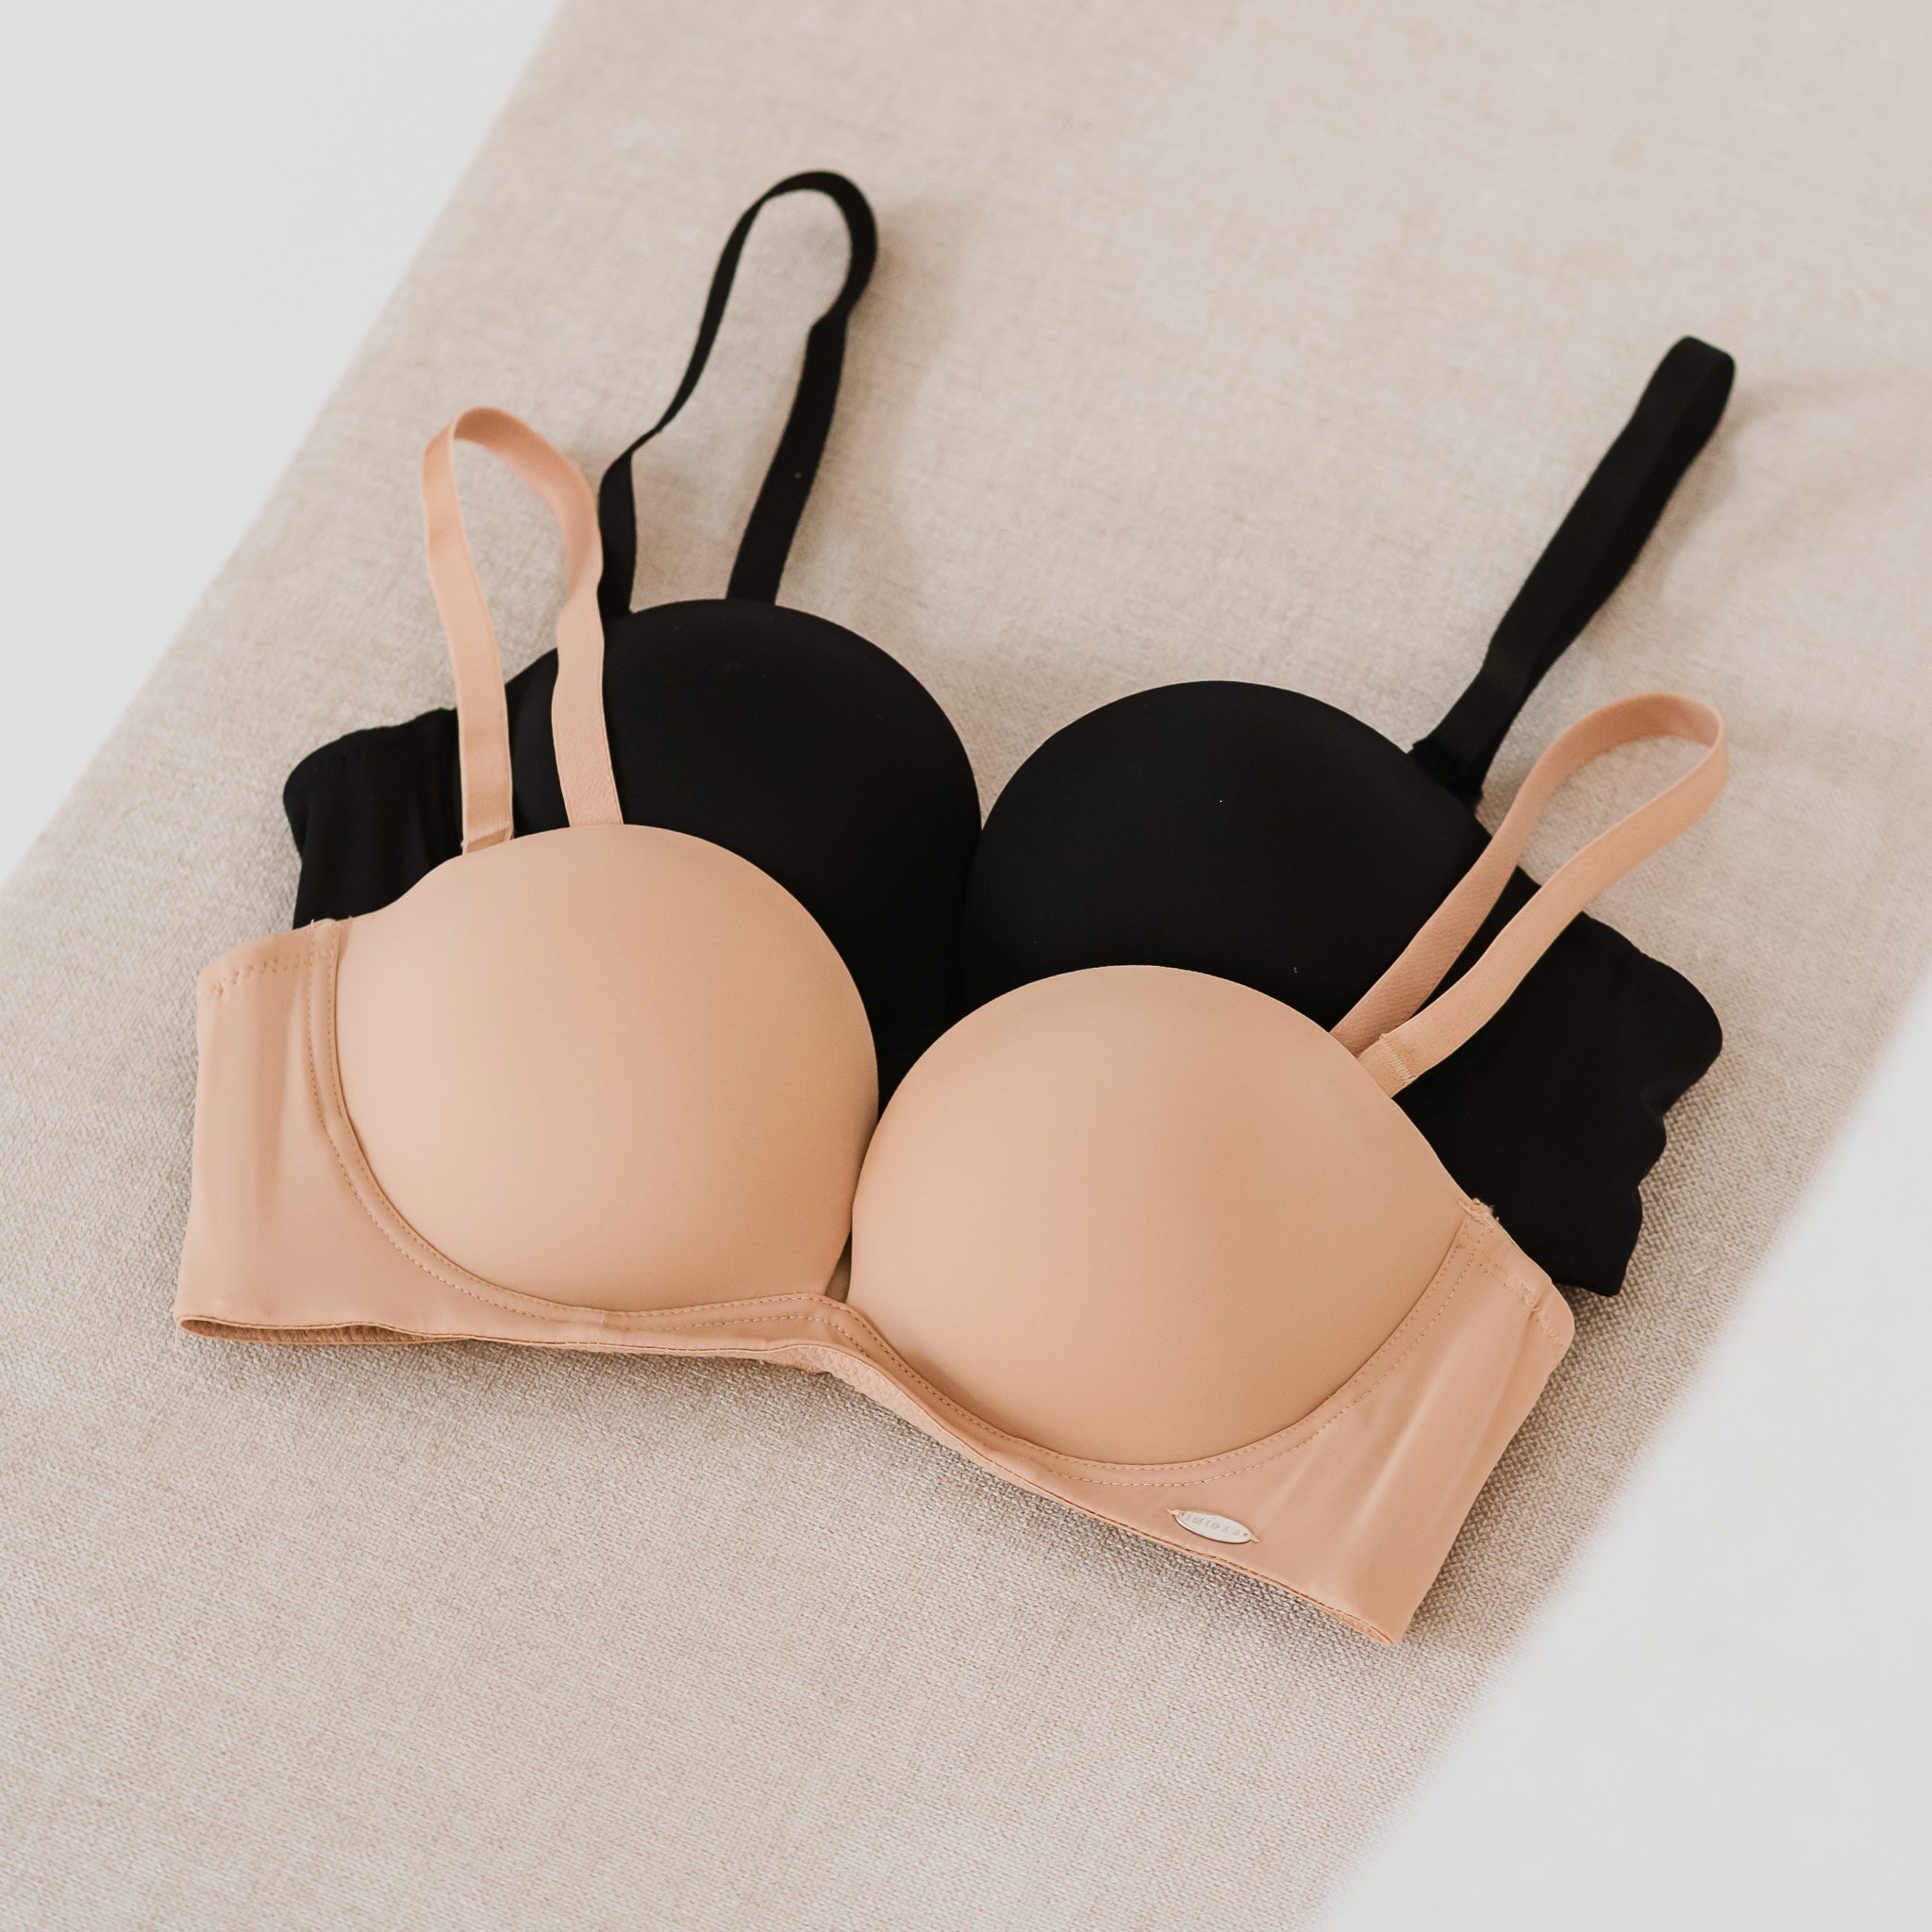 LYCRA® FitSense™ delivers breakthrough benefits in modesty and bra